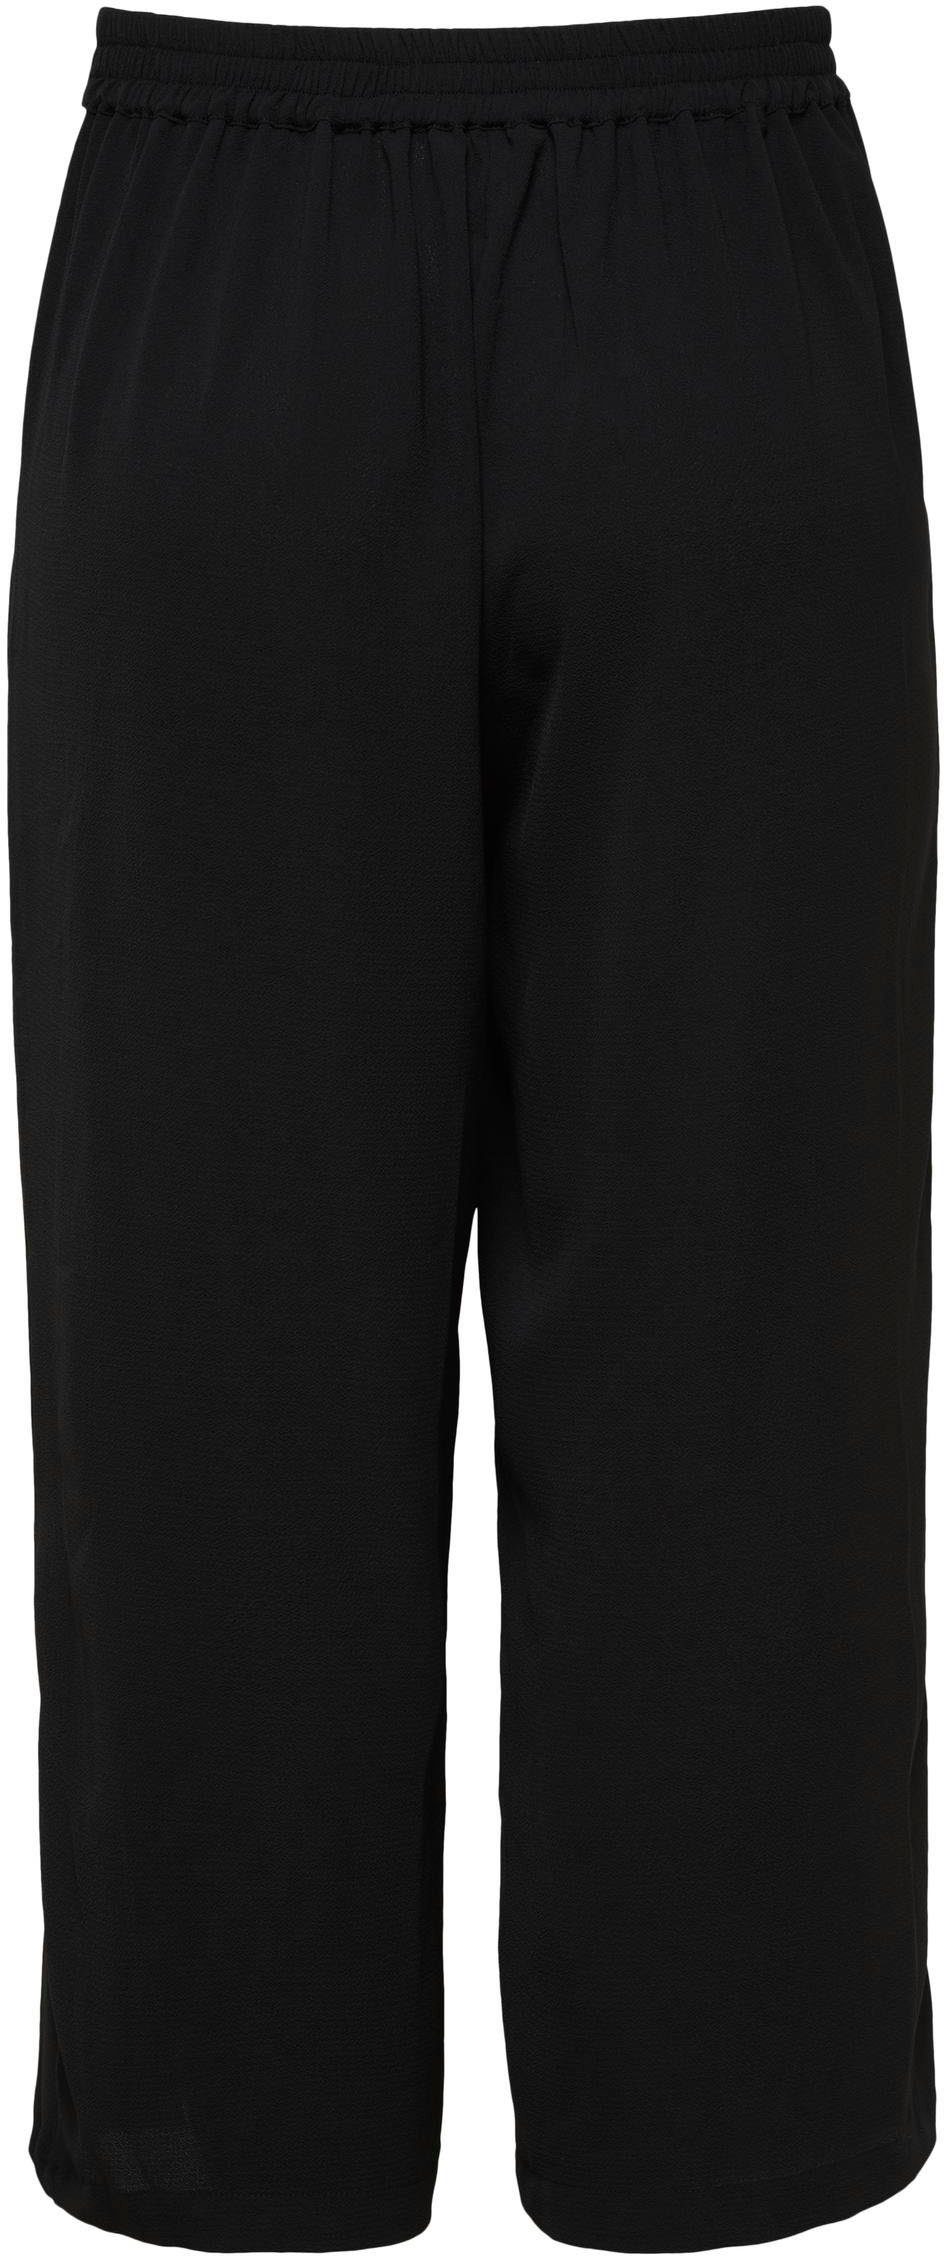 PANT gestreiftem oder PALAZZO Design ONLY Black NOOS PTM uni ONLWINNER Palazzohose in CULOTTE